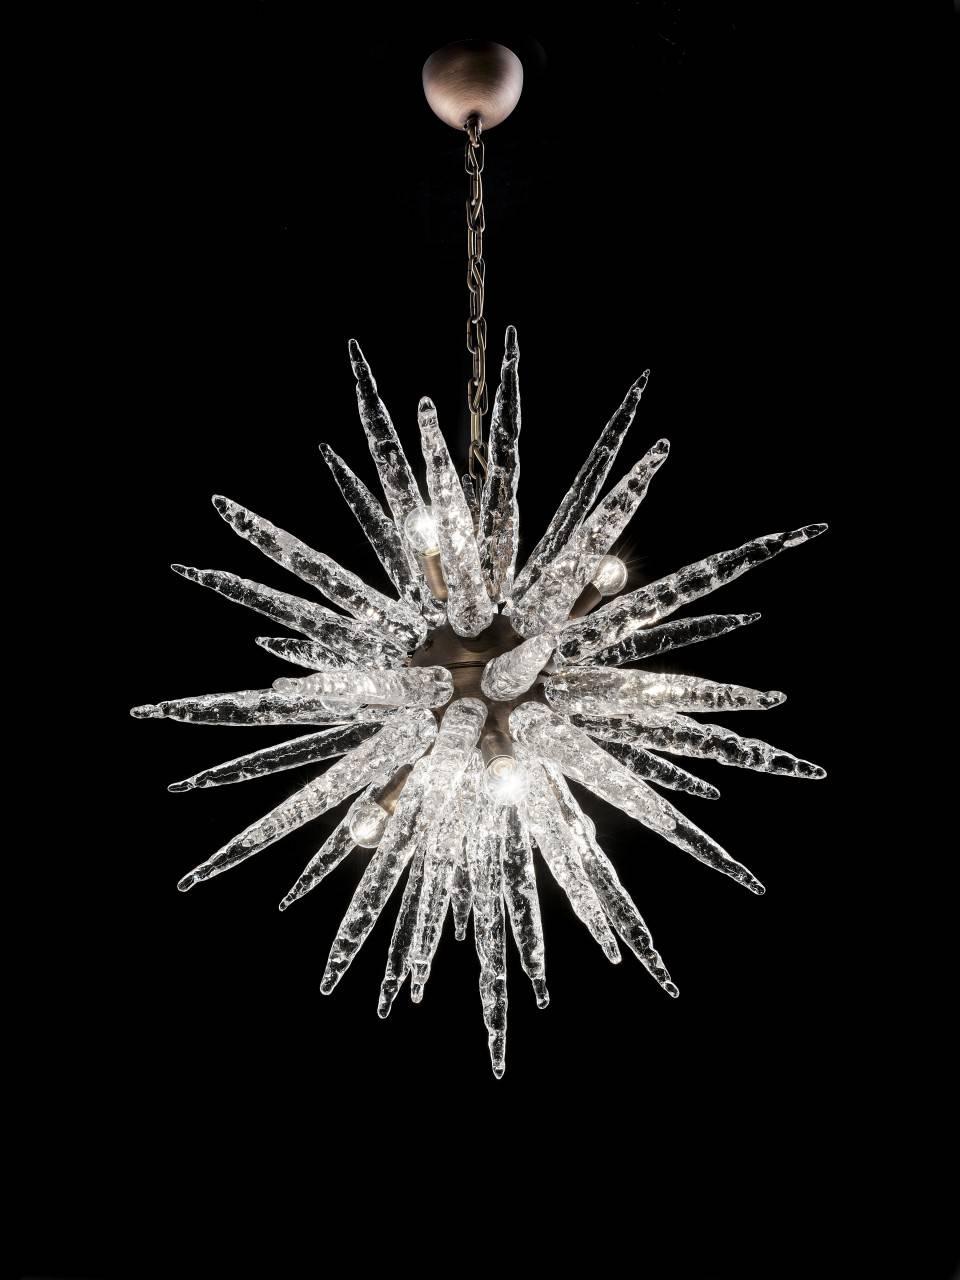 Italian Sputnik chandelier with clear Murano icicle shaped glasses, mounted on bronze metal finish frame / Designed by Fabio Bergomi for Fabio Ltd / Made in Italy
9 lights / E12 or E14 type / max 40W each
Height: 30 inches plus chain and canopy /